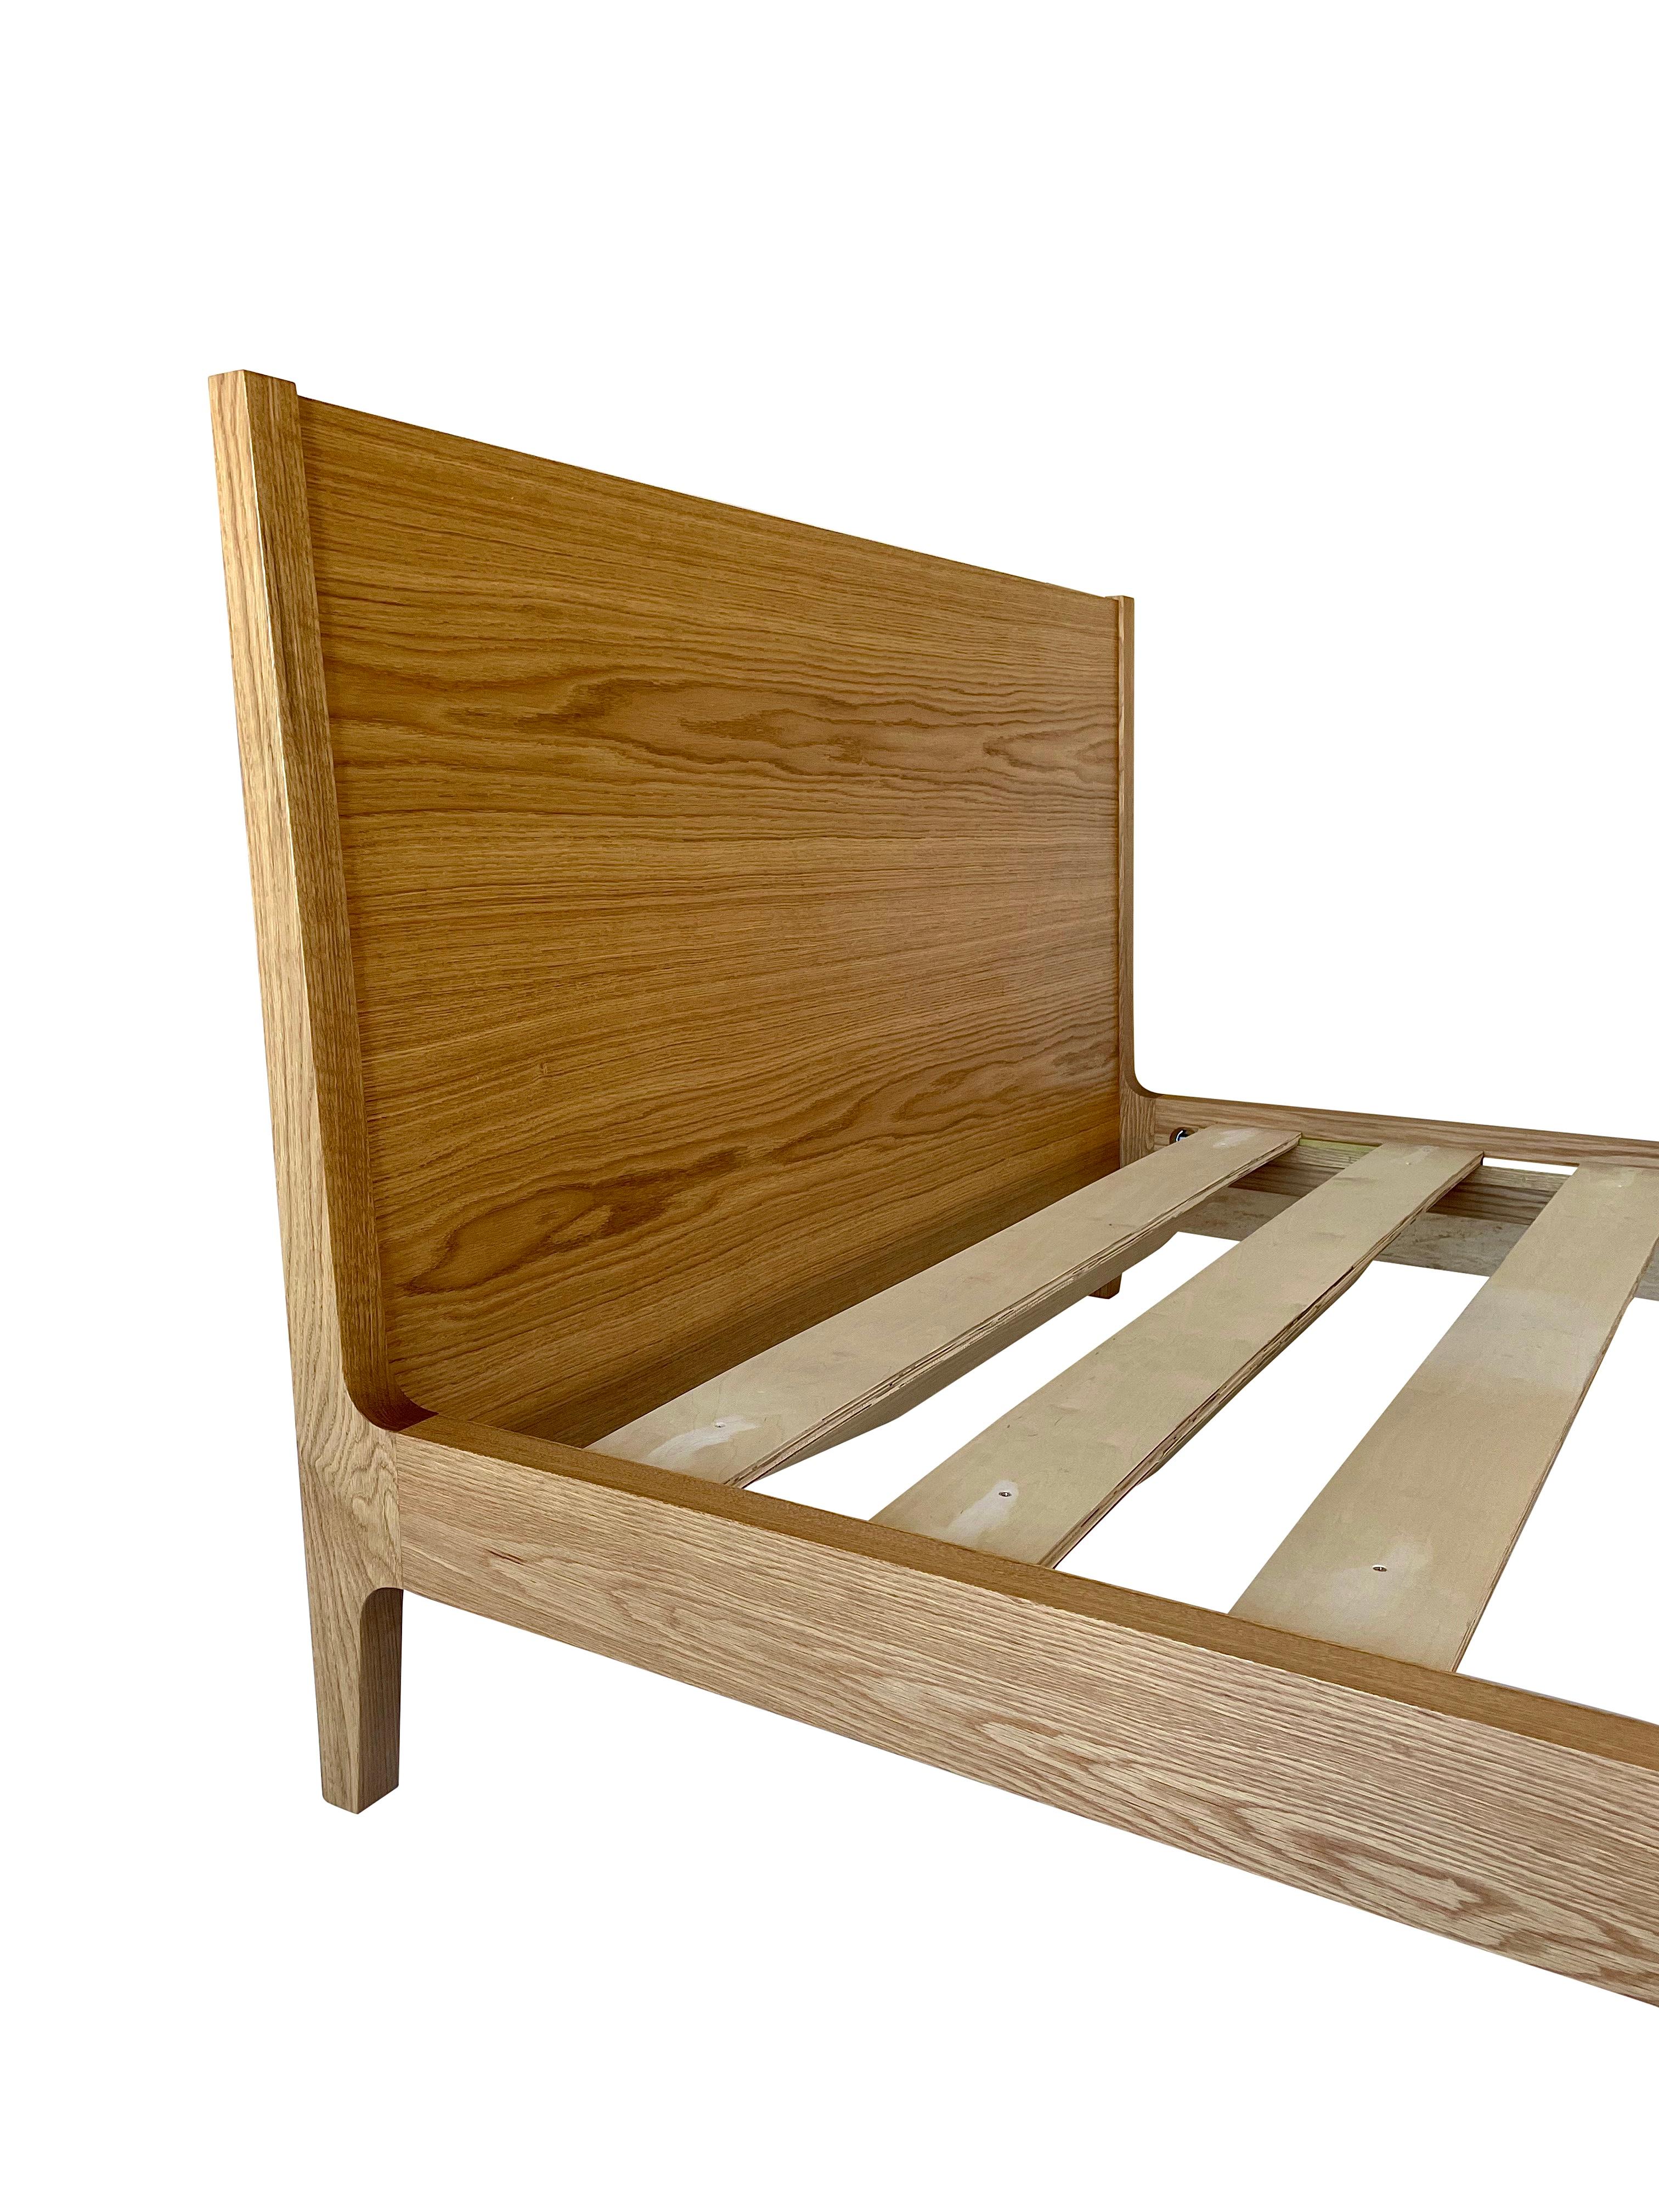 Hand-Crafted Contemporary Bed Built in White Oak by Boyd & Allister For Sale